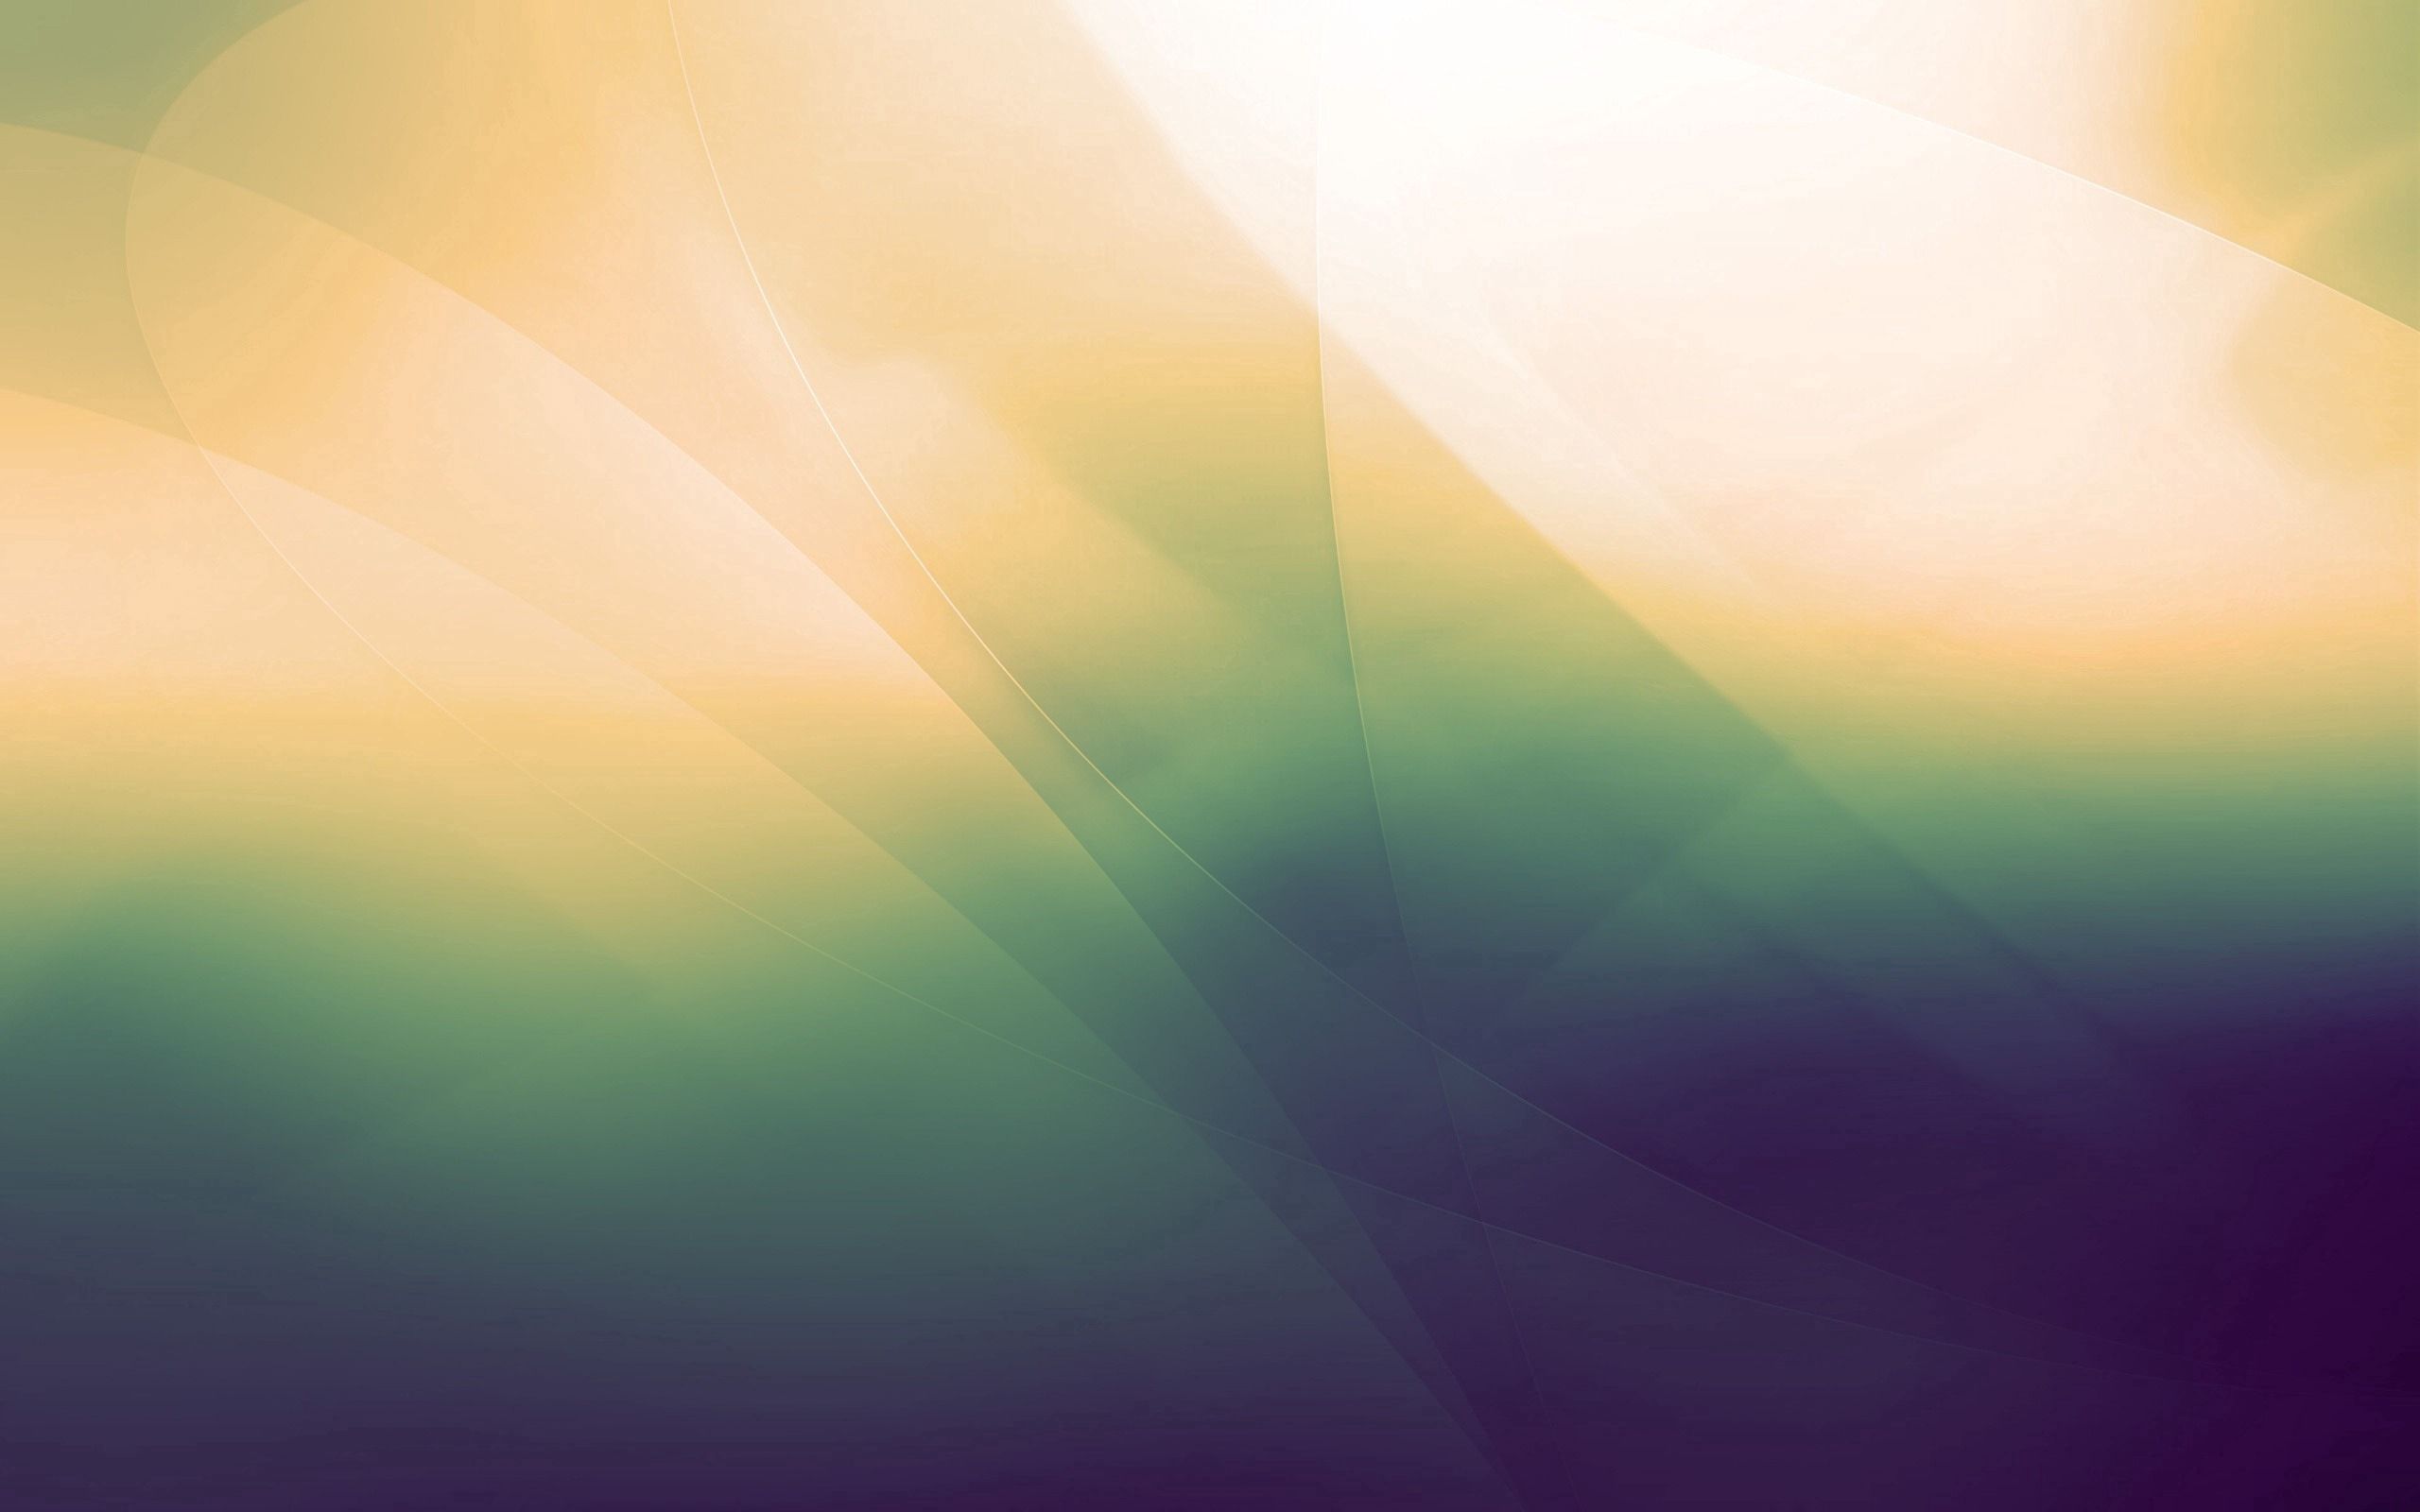 faded, abstract, shine, light, blur, smooth, paints for android